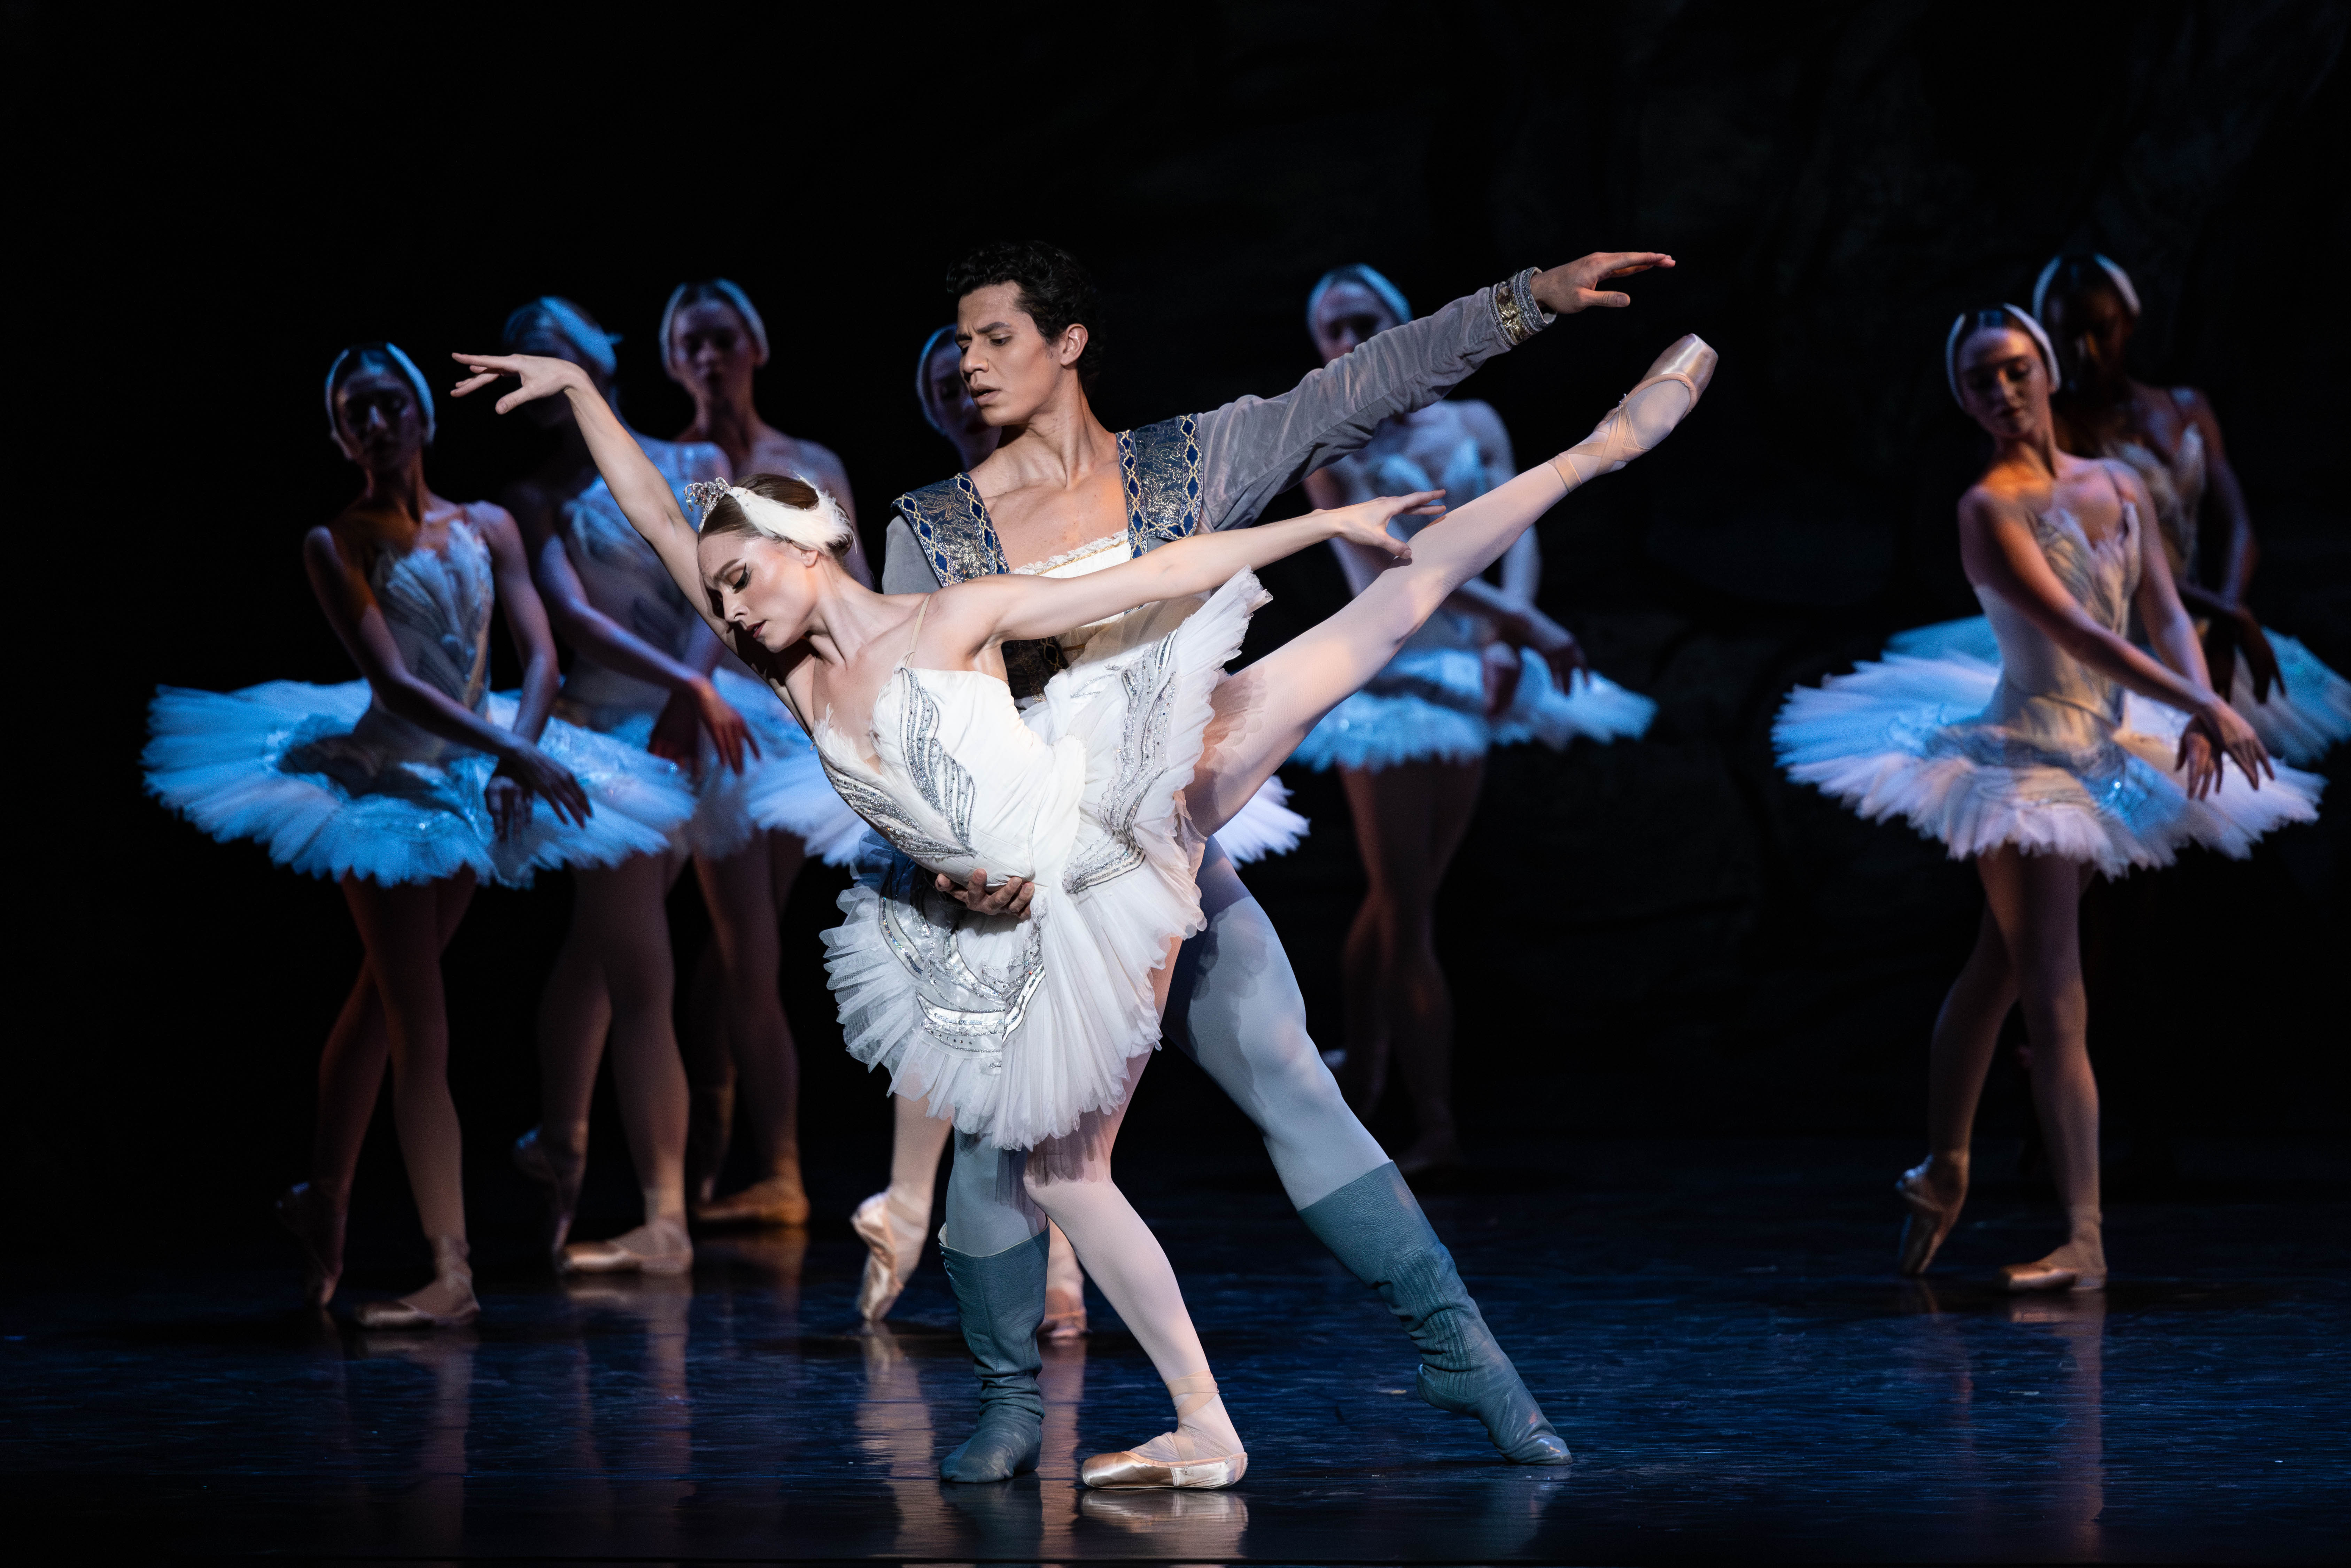 Principal Artists Amy Potter and Hadriel Diniz Premiere the Leading Roles in Swan Lake